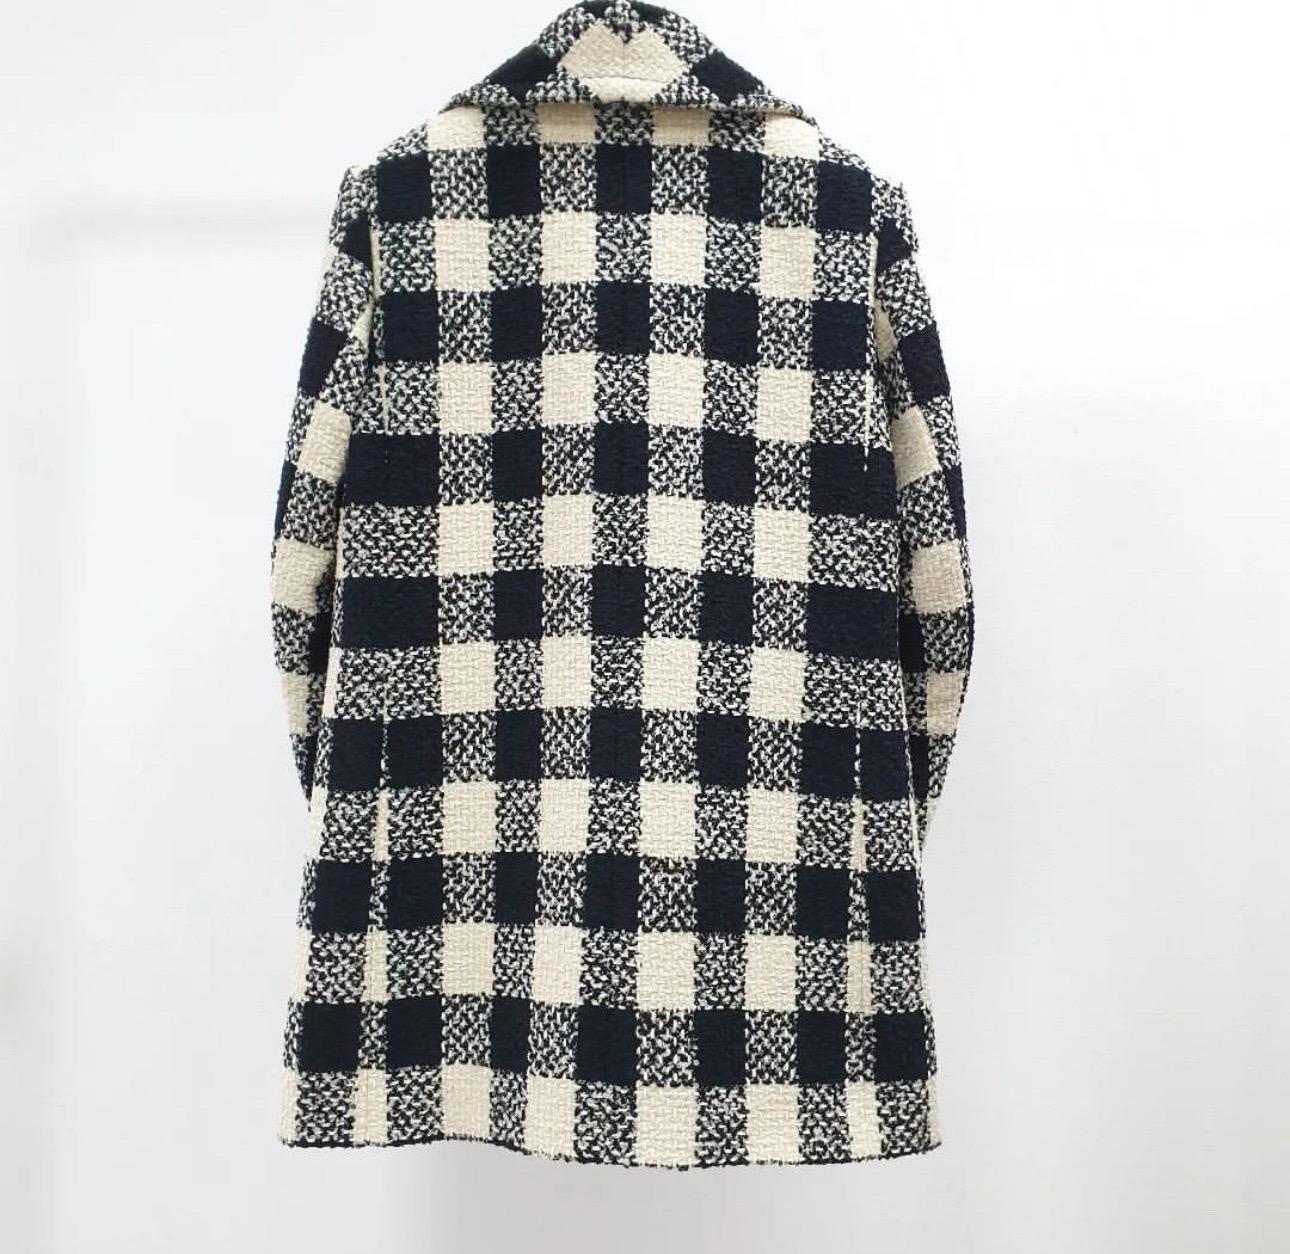 CHANEL 2016 Pharrell Ivory Black Tweed Jacket Coat In Excellent Condition For Sale In Krakow, PL